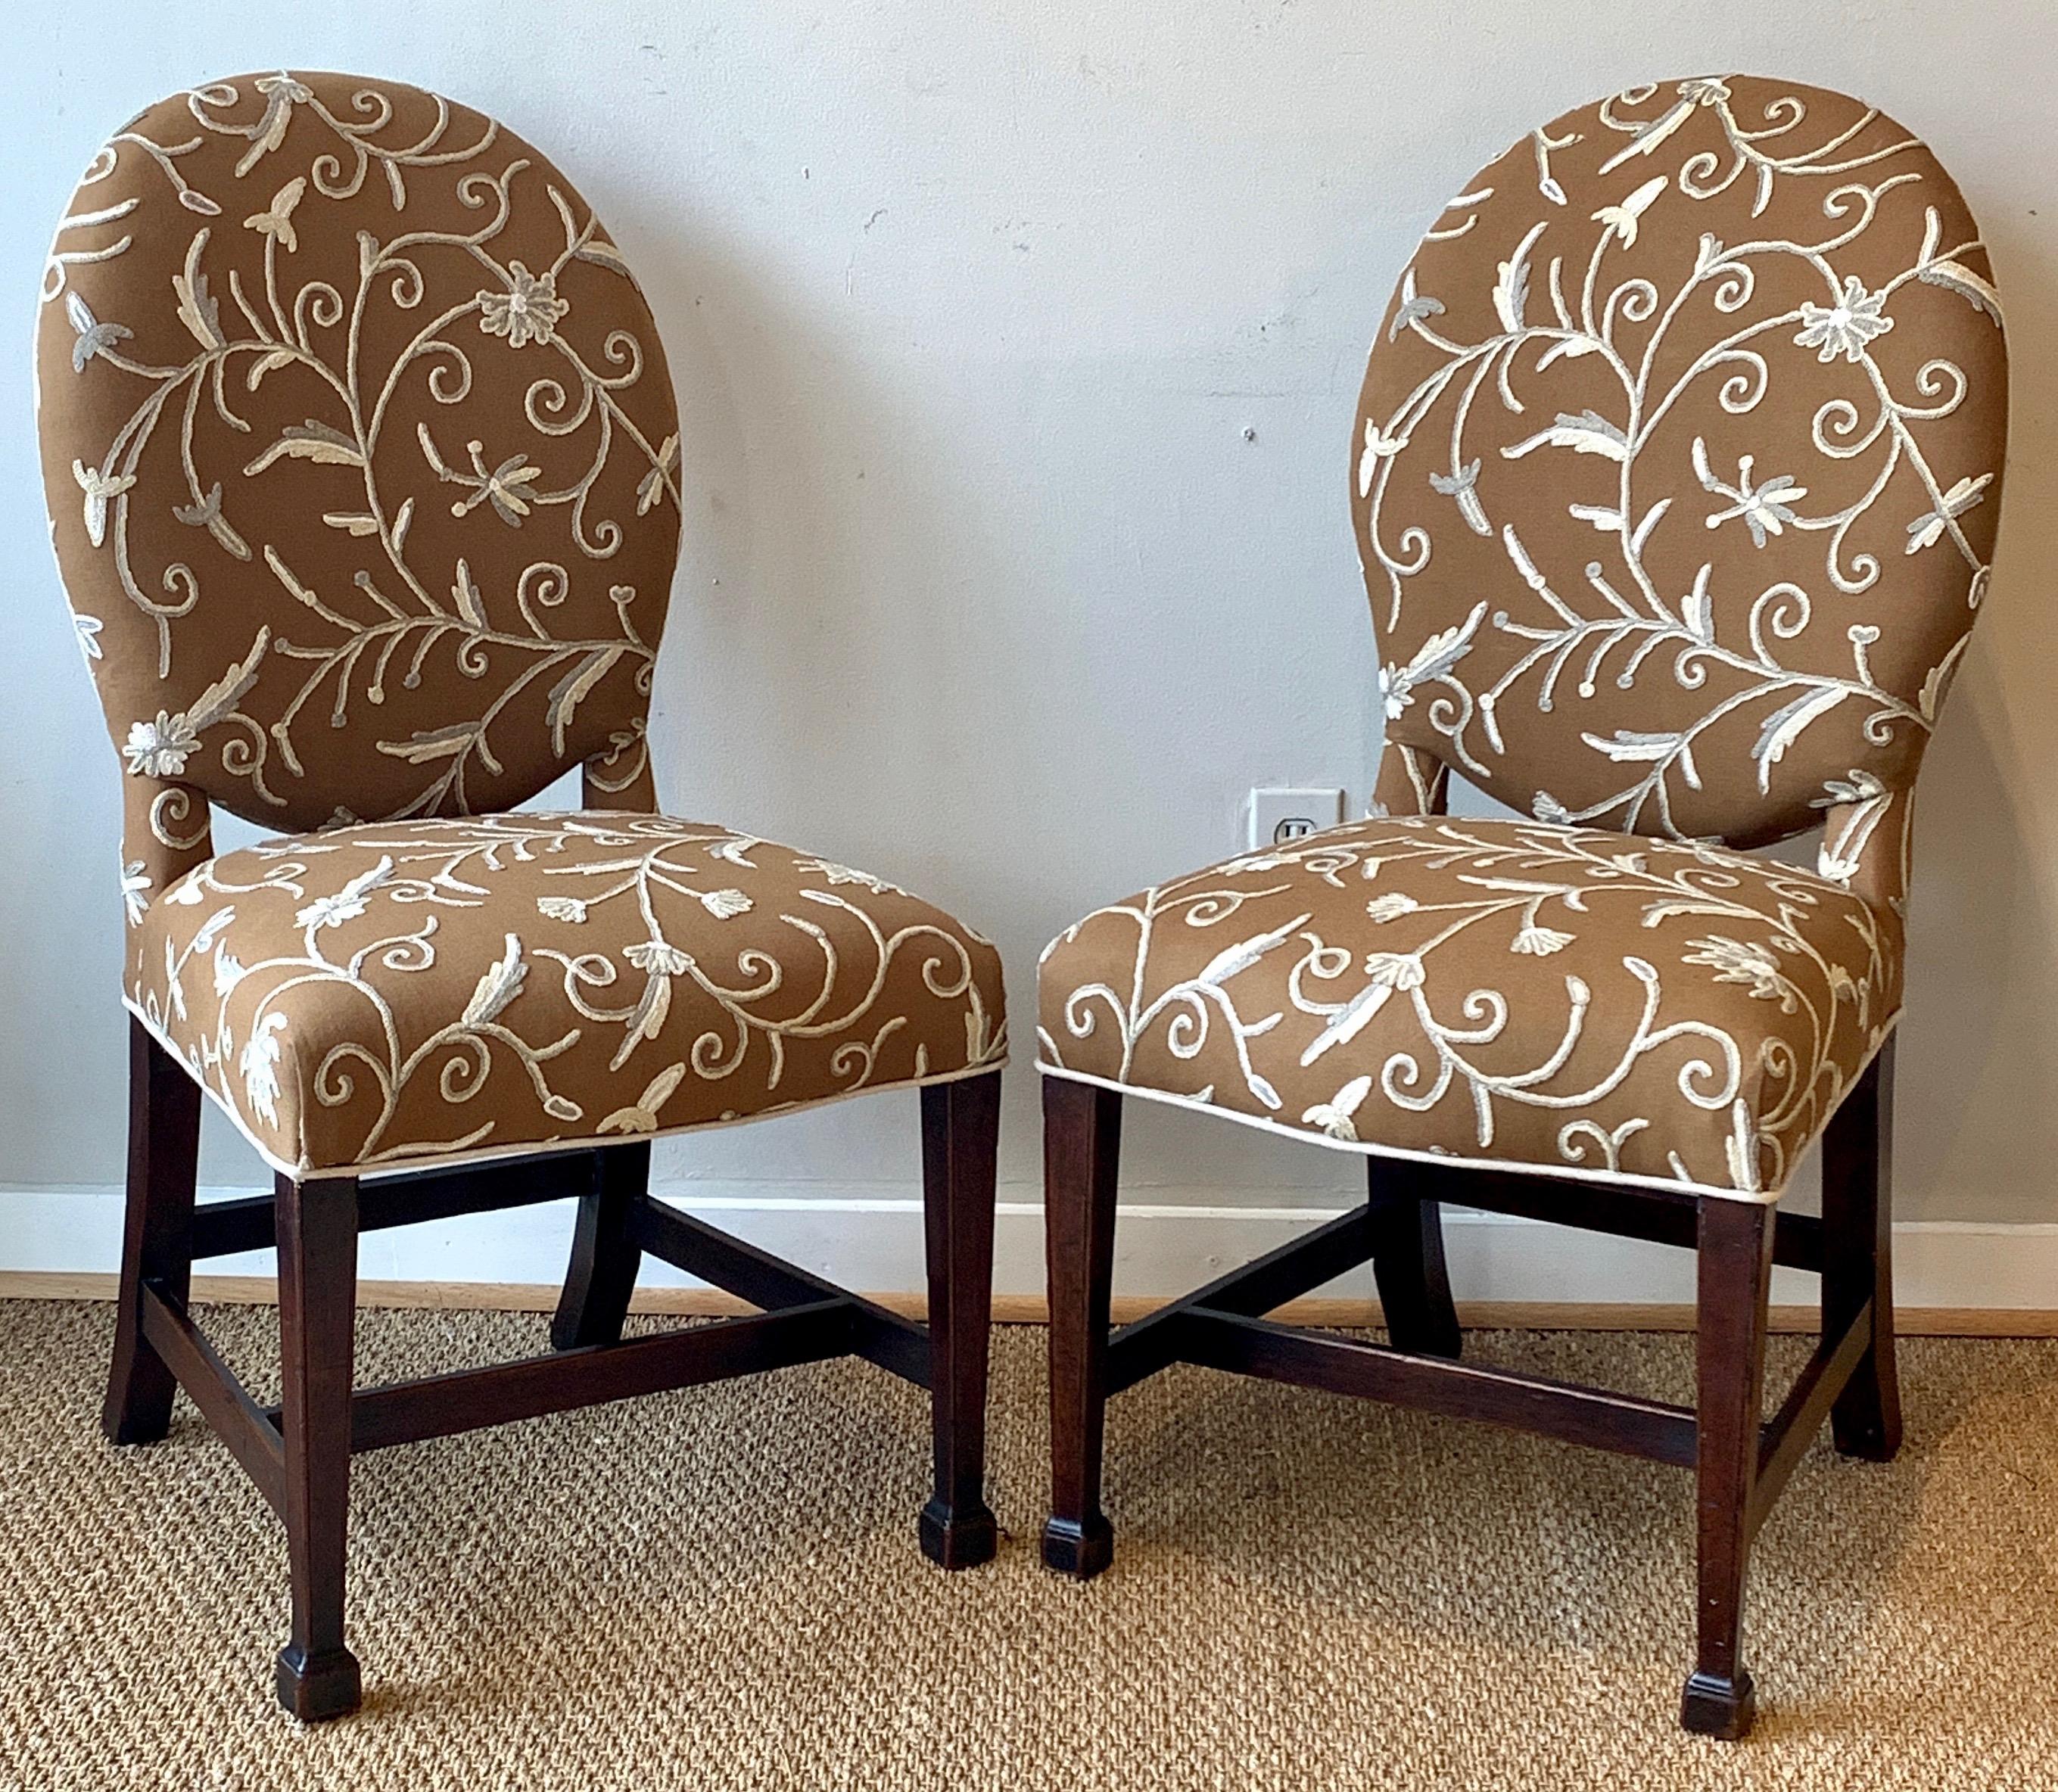 A very handsome pair of English George III side chairs with square tapering mahogany legs recently upholstered in a brown, cream and gray crewel fabric.